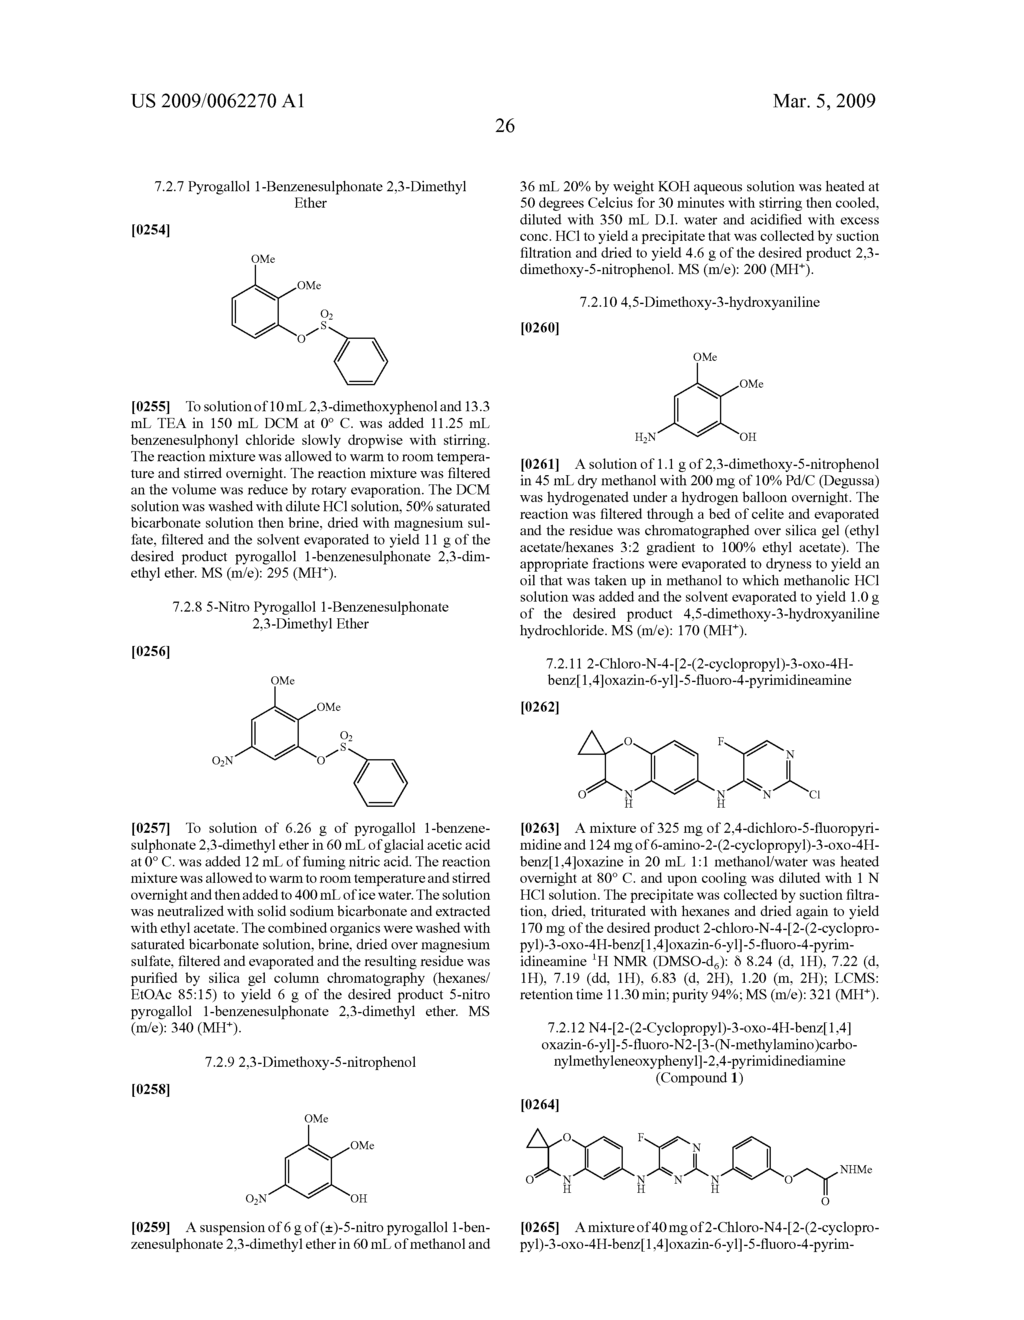 SPIRO 2,4 PYRIMIDINEDIAMINE COMPOUNDS AND THEIR USES - diagram, schematic, and image 30